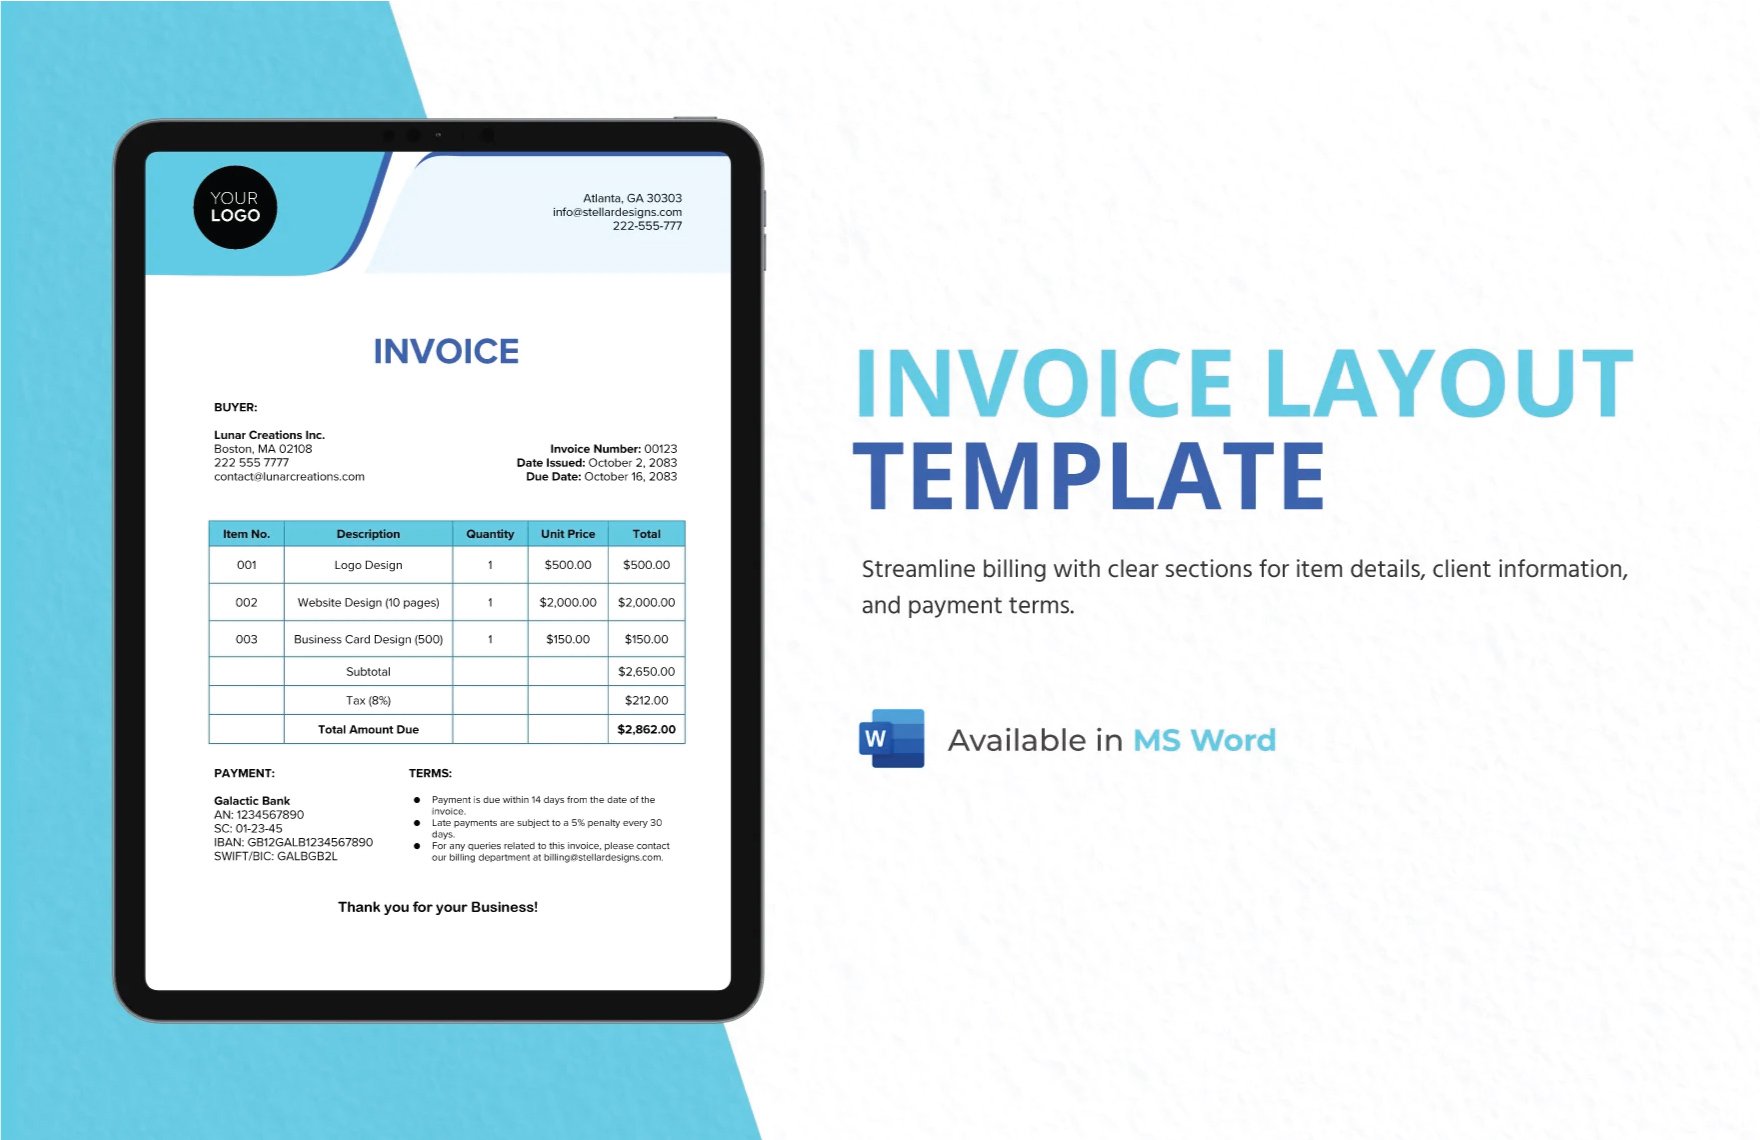 Invoice Layout Template in Word